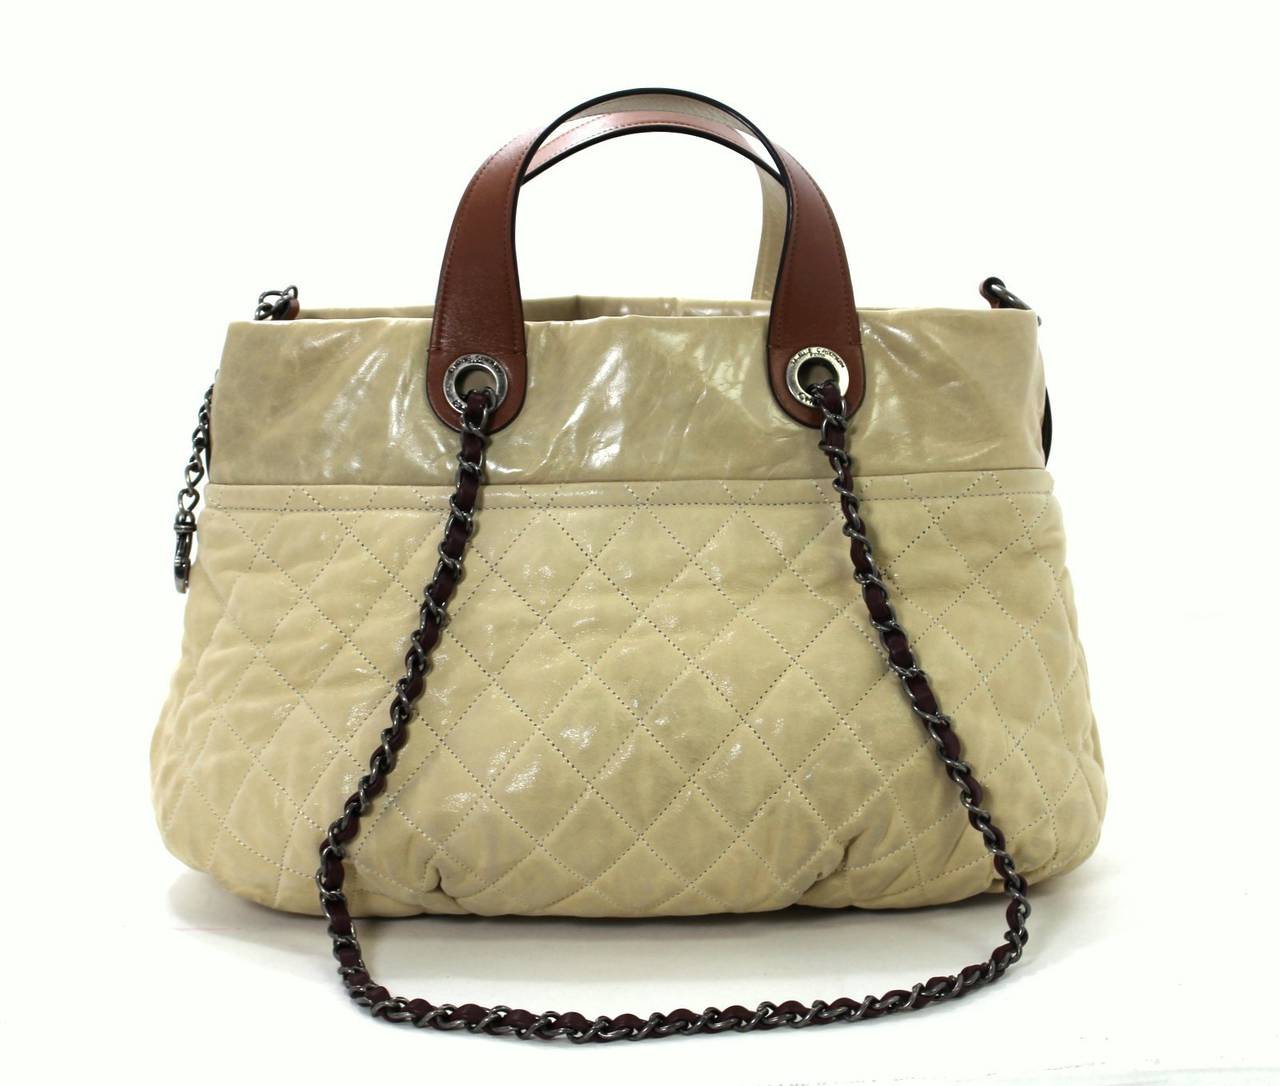 In very good condition, the Chanel Beige in the Mix bag is a unique style easily blending texture and pattern.  Previously owned, it has areas of darkening due to normal use and the light color.  This is the large version that originally retailed